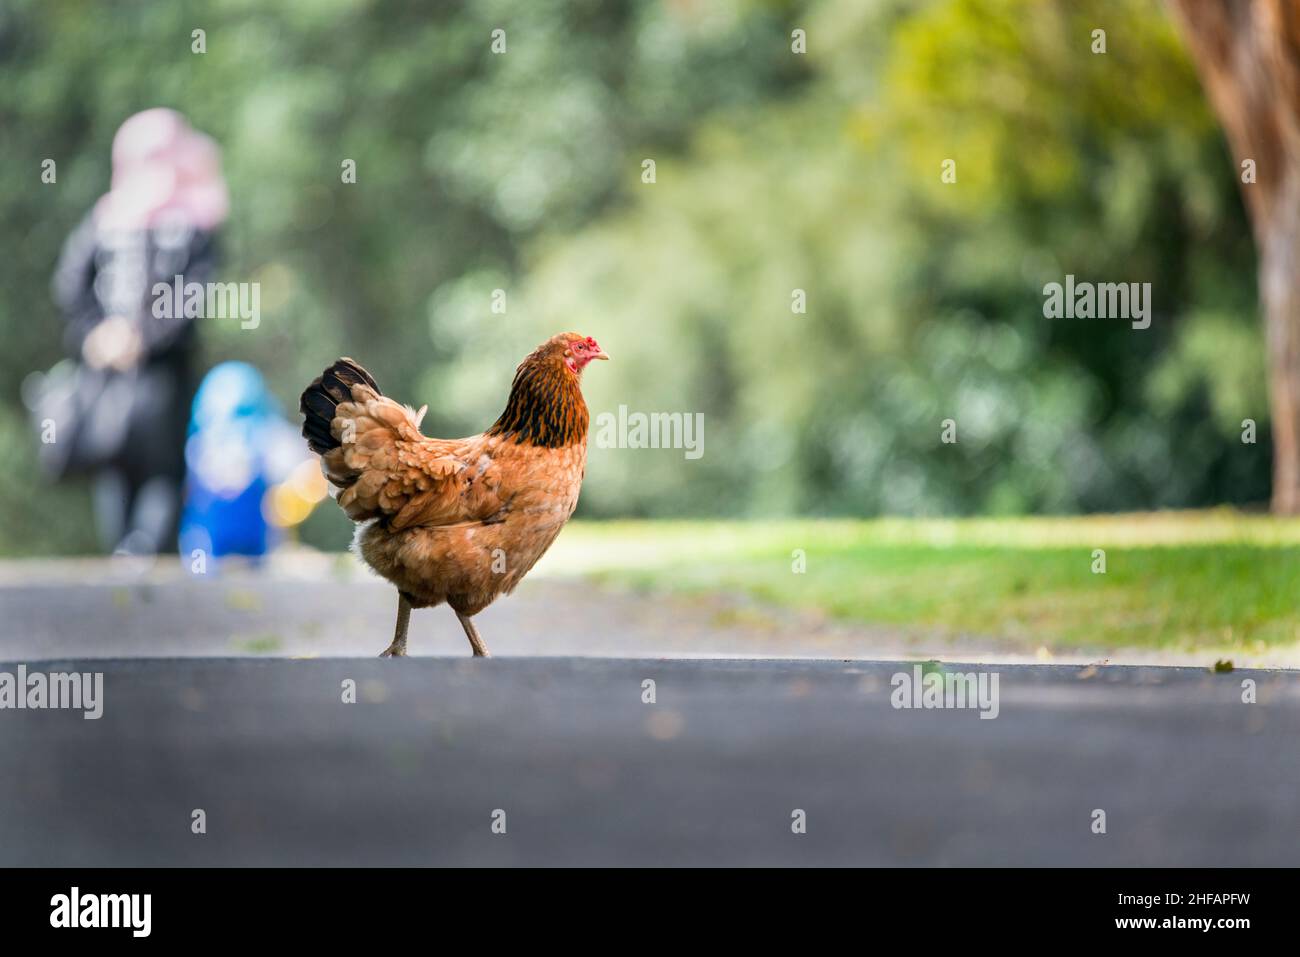 Cock with out of focus hen in background Stock Photo - Alamy